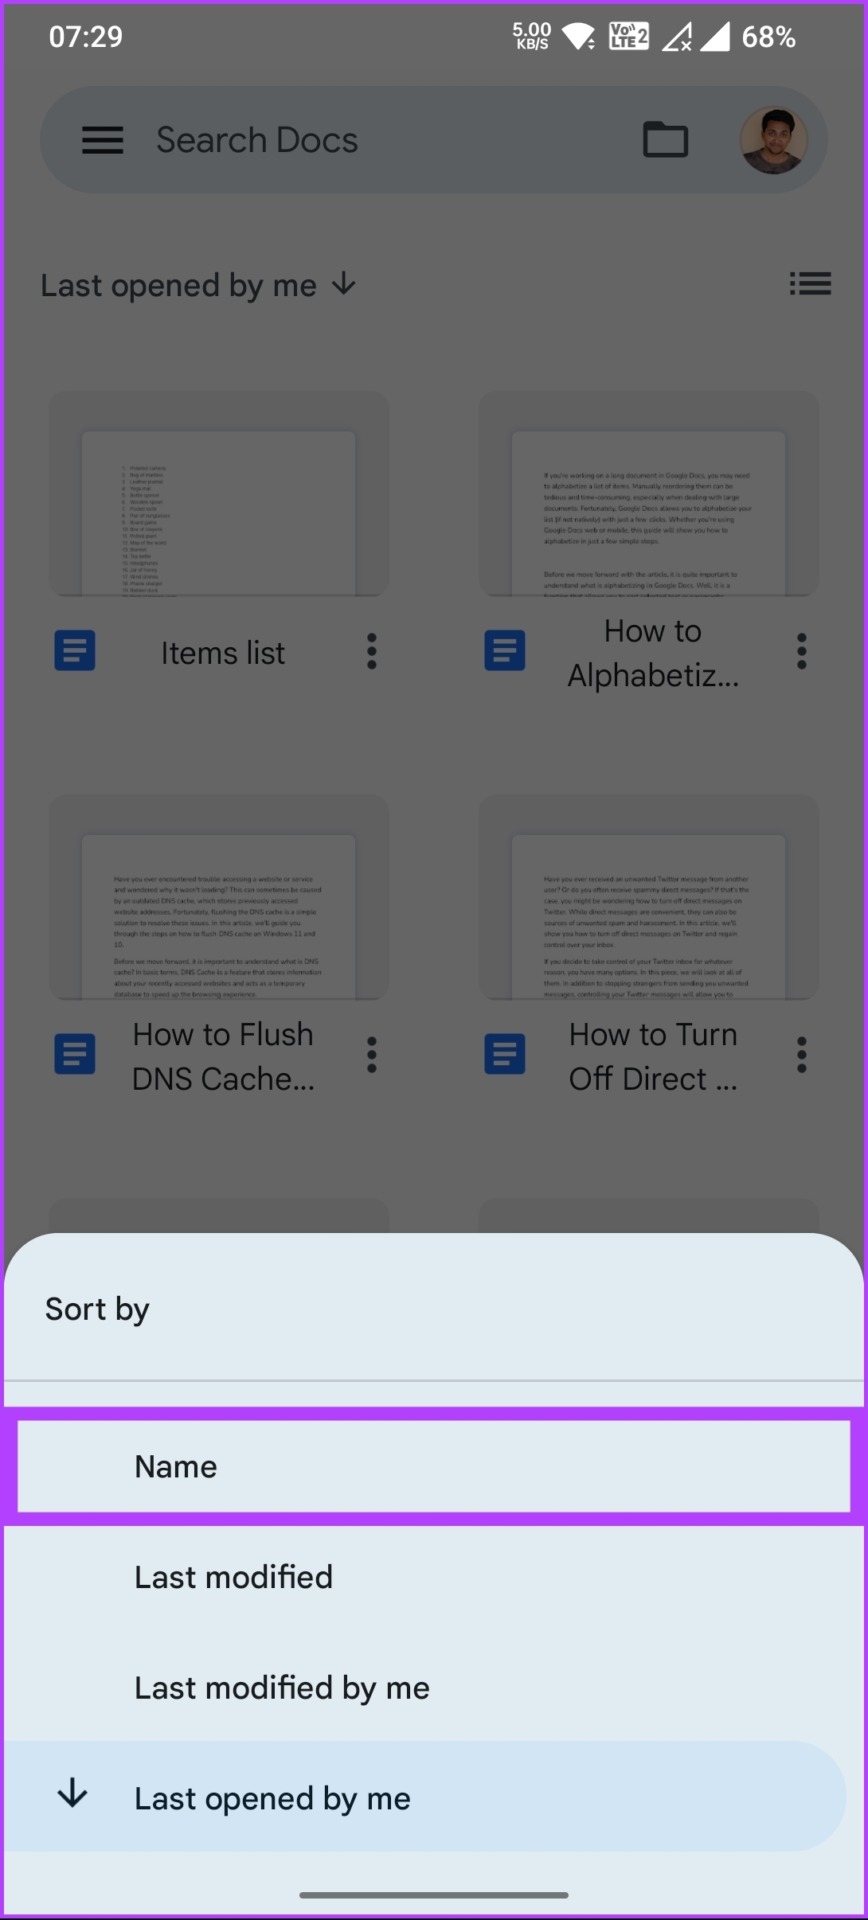 select sort by Name